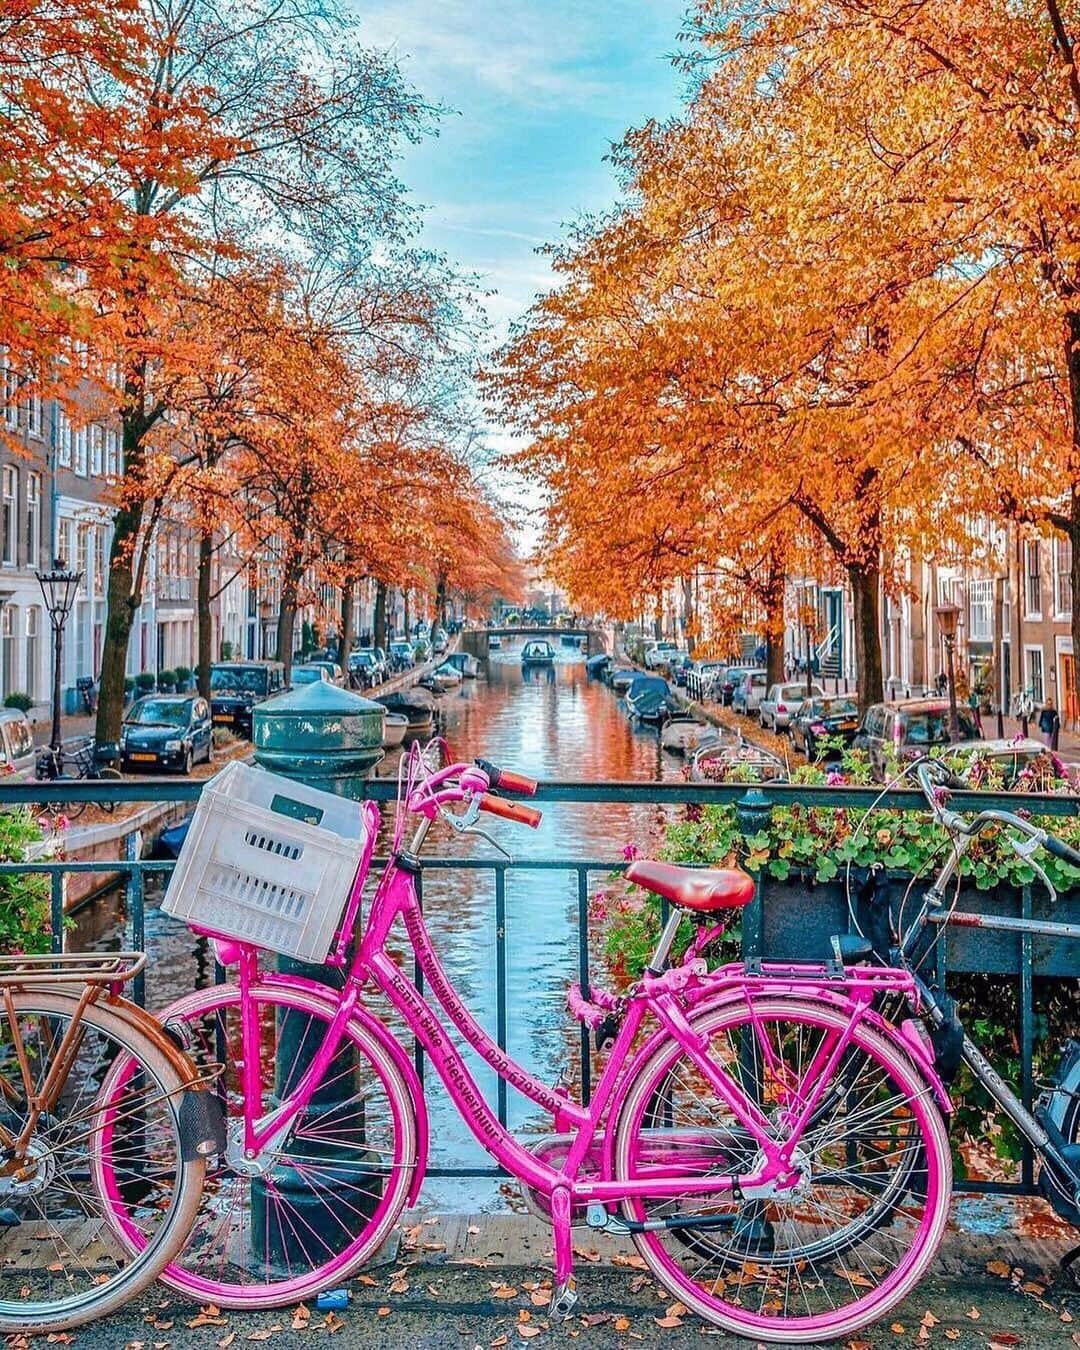 Izkizのインスタグラム：「One of my most reposted photos..Autumn in Amsterdam! 🍂 What’s your favourite season? 👙🍂❄️🌷 Mine is Summer but I also love Spring..and Christmas/Winter, and the colours of Autumn sooooo basically I love them all 😄」